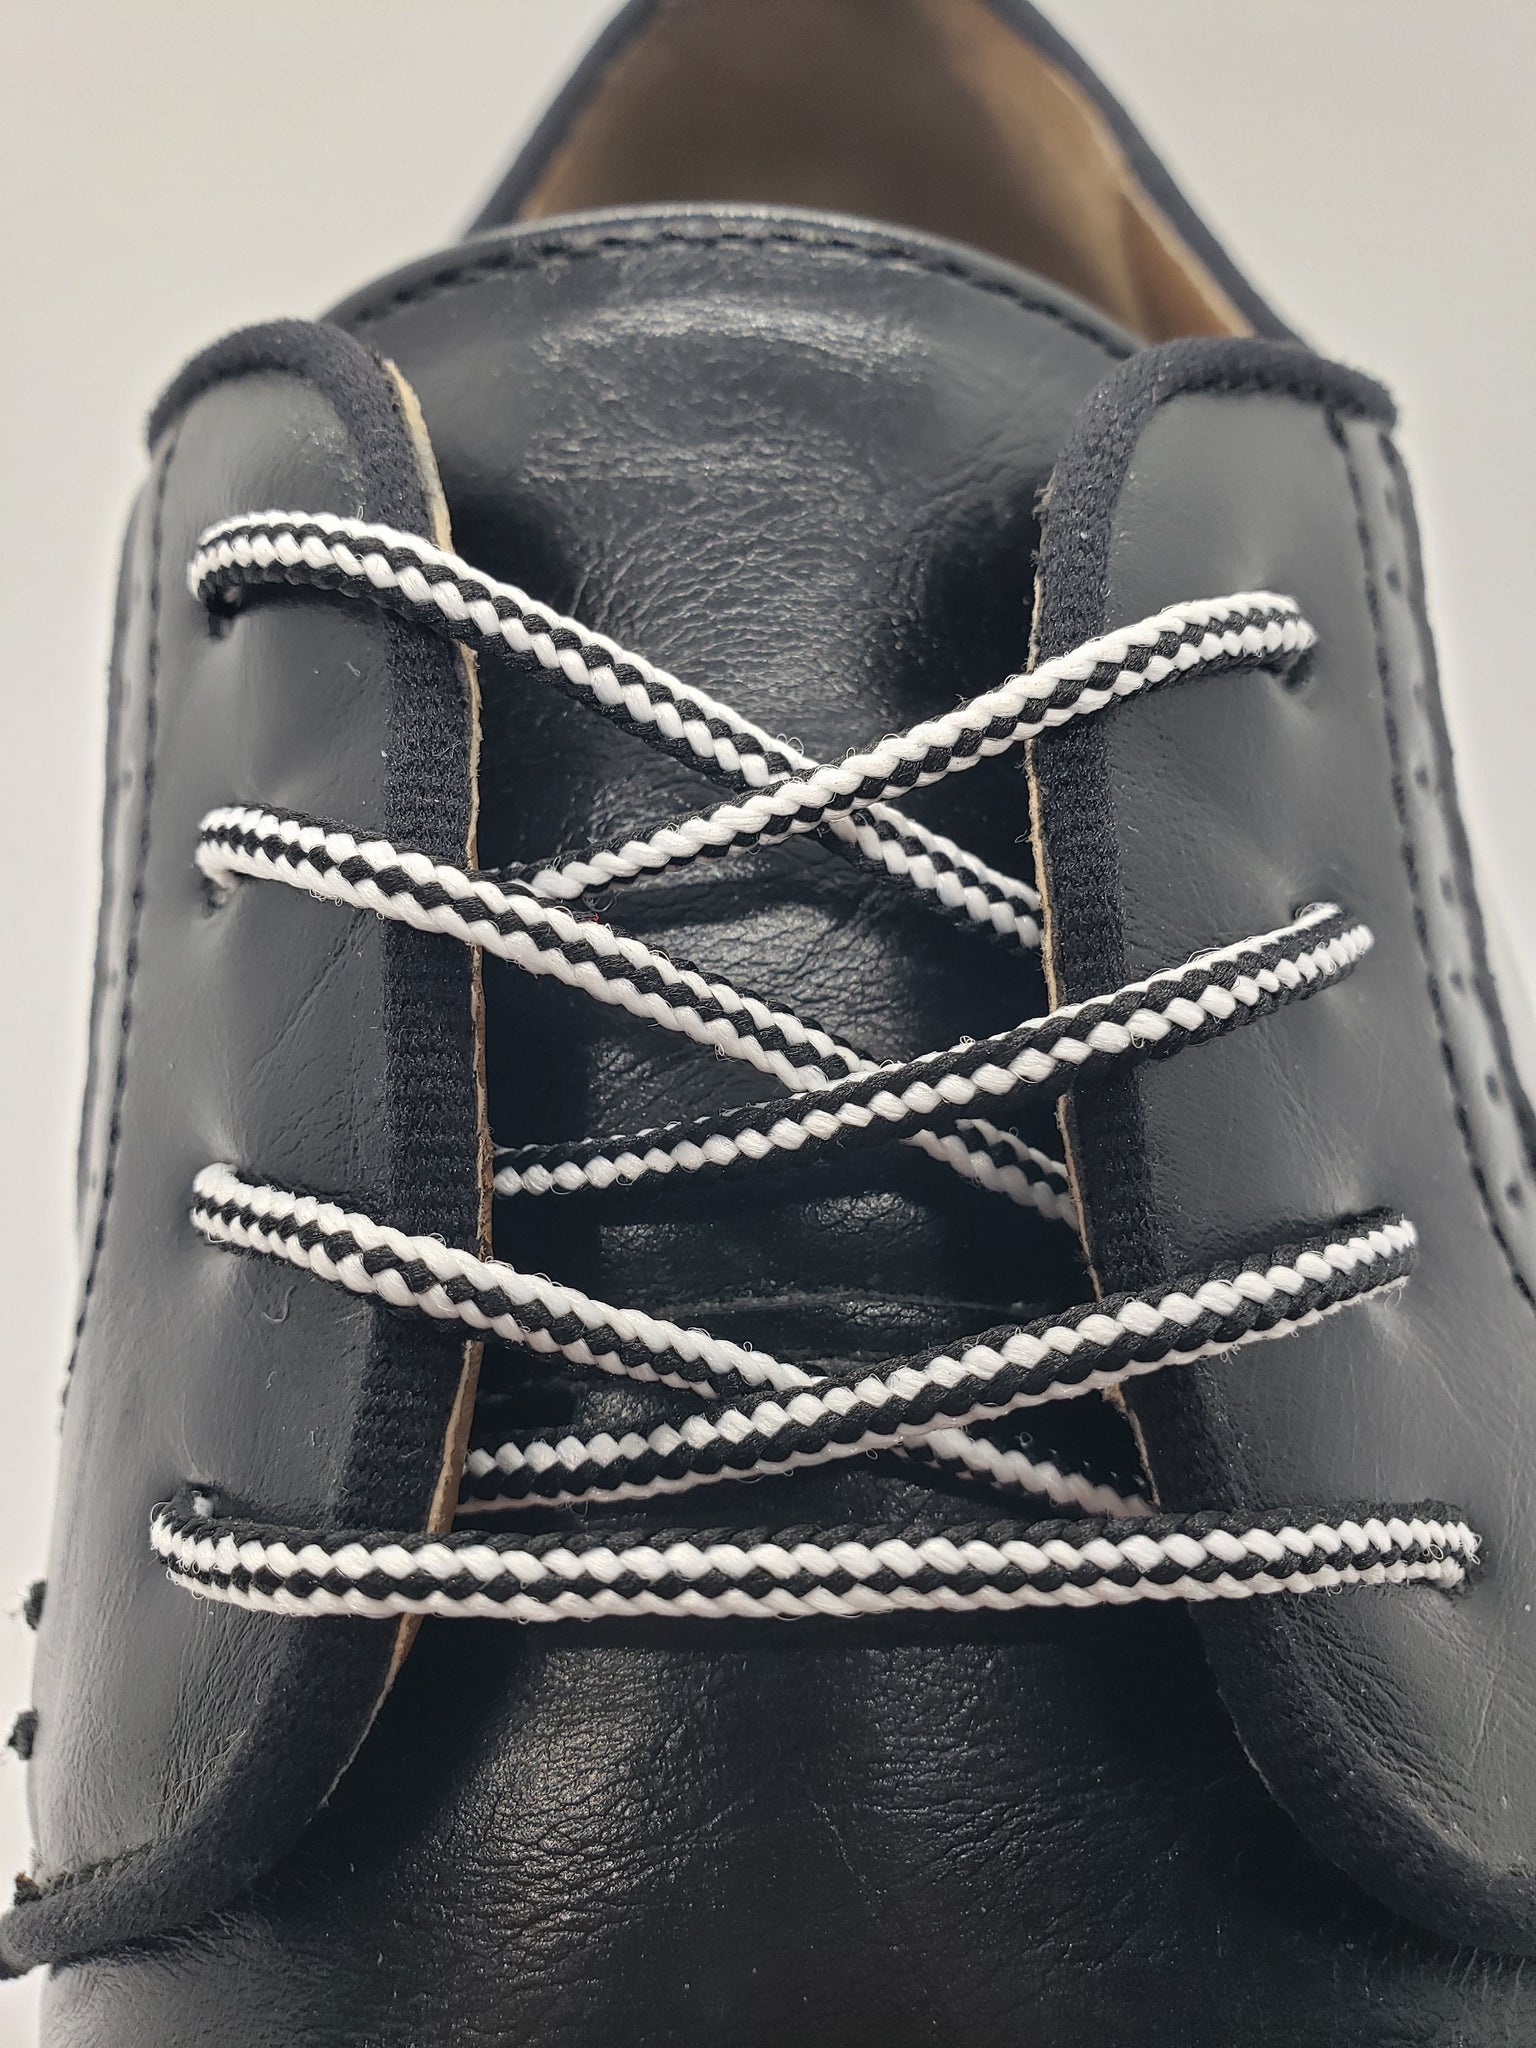 Round Striped Dress Shoelaces - Black and White